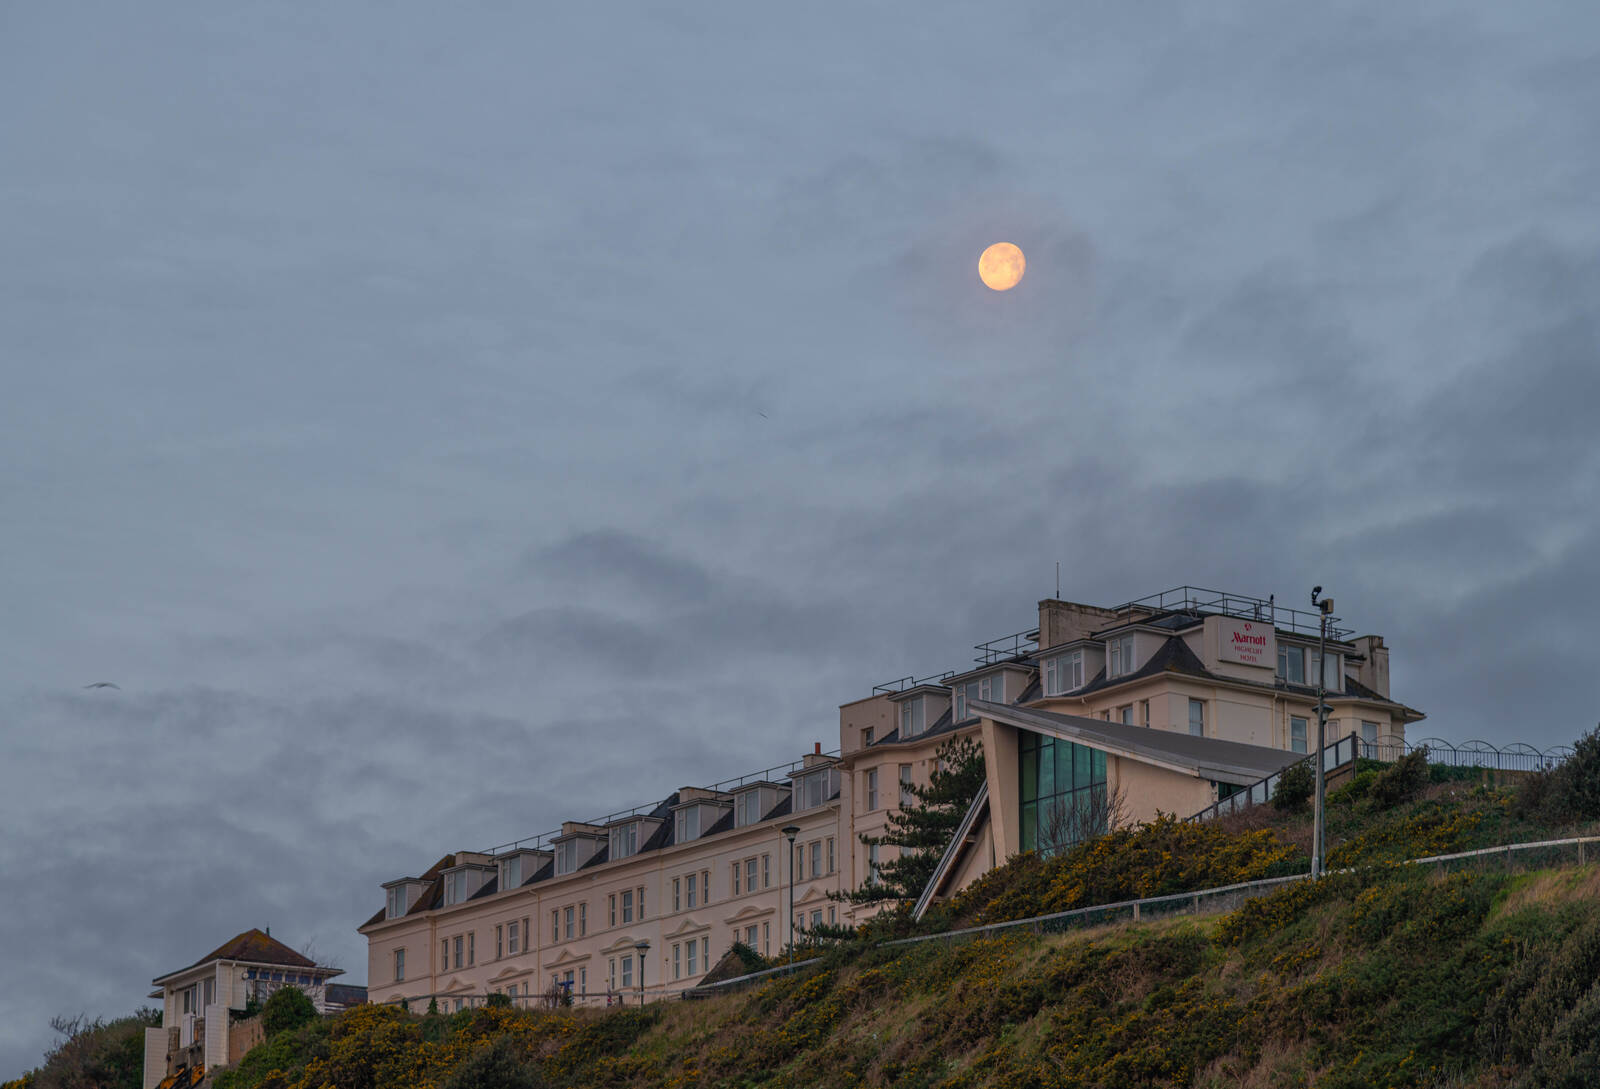 Image of Marriott Hotel from Bournemouth Beach by michael bennett